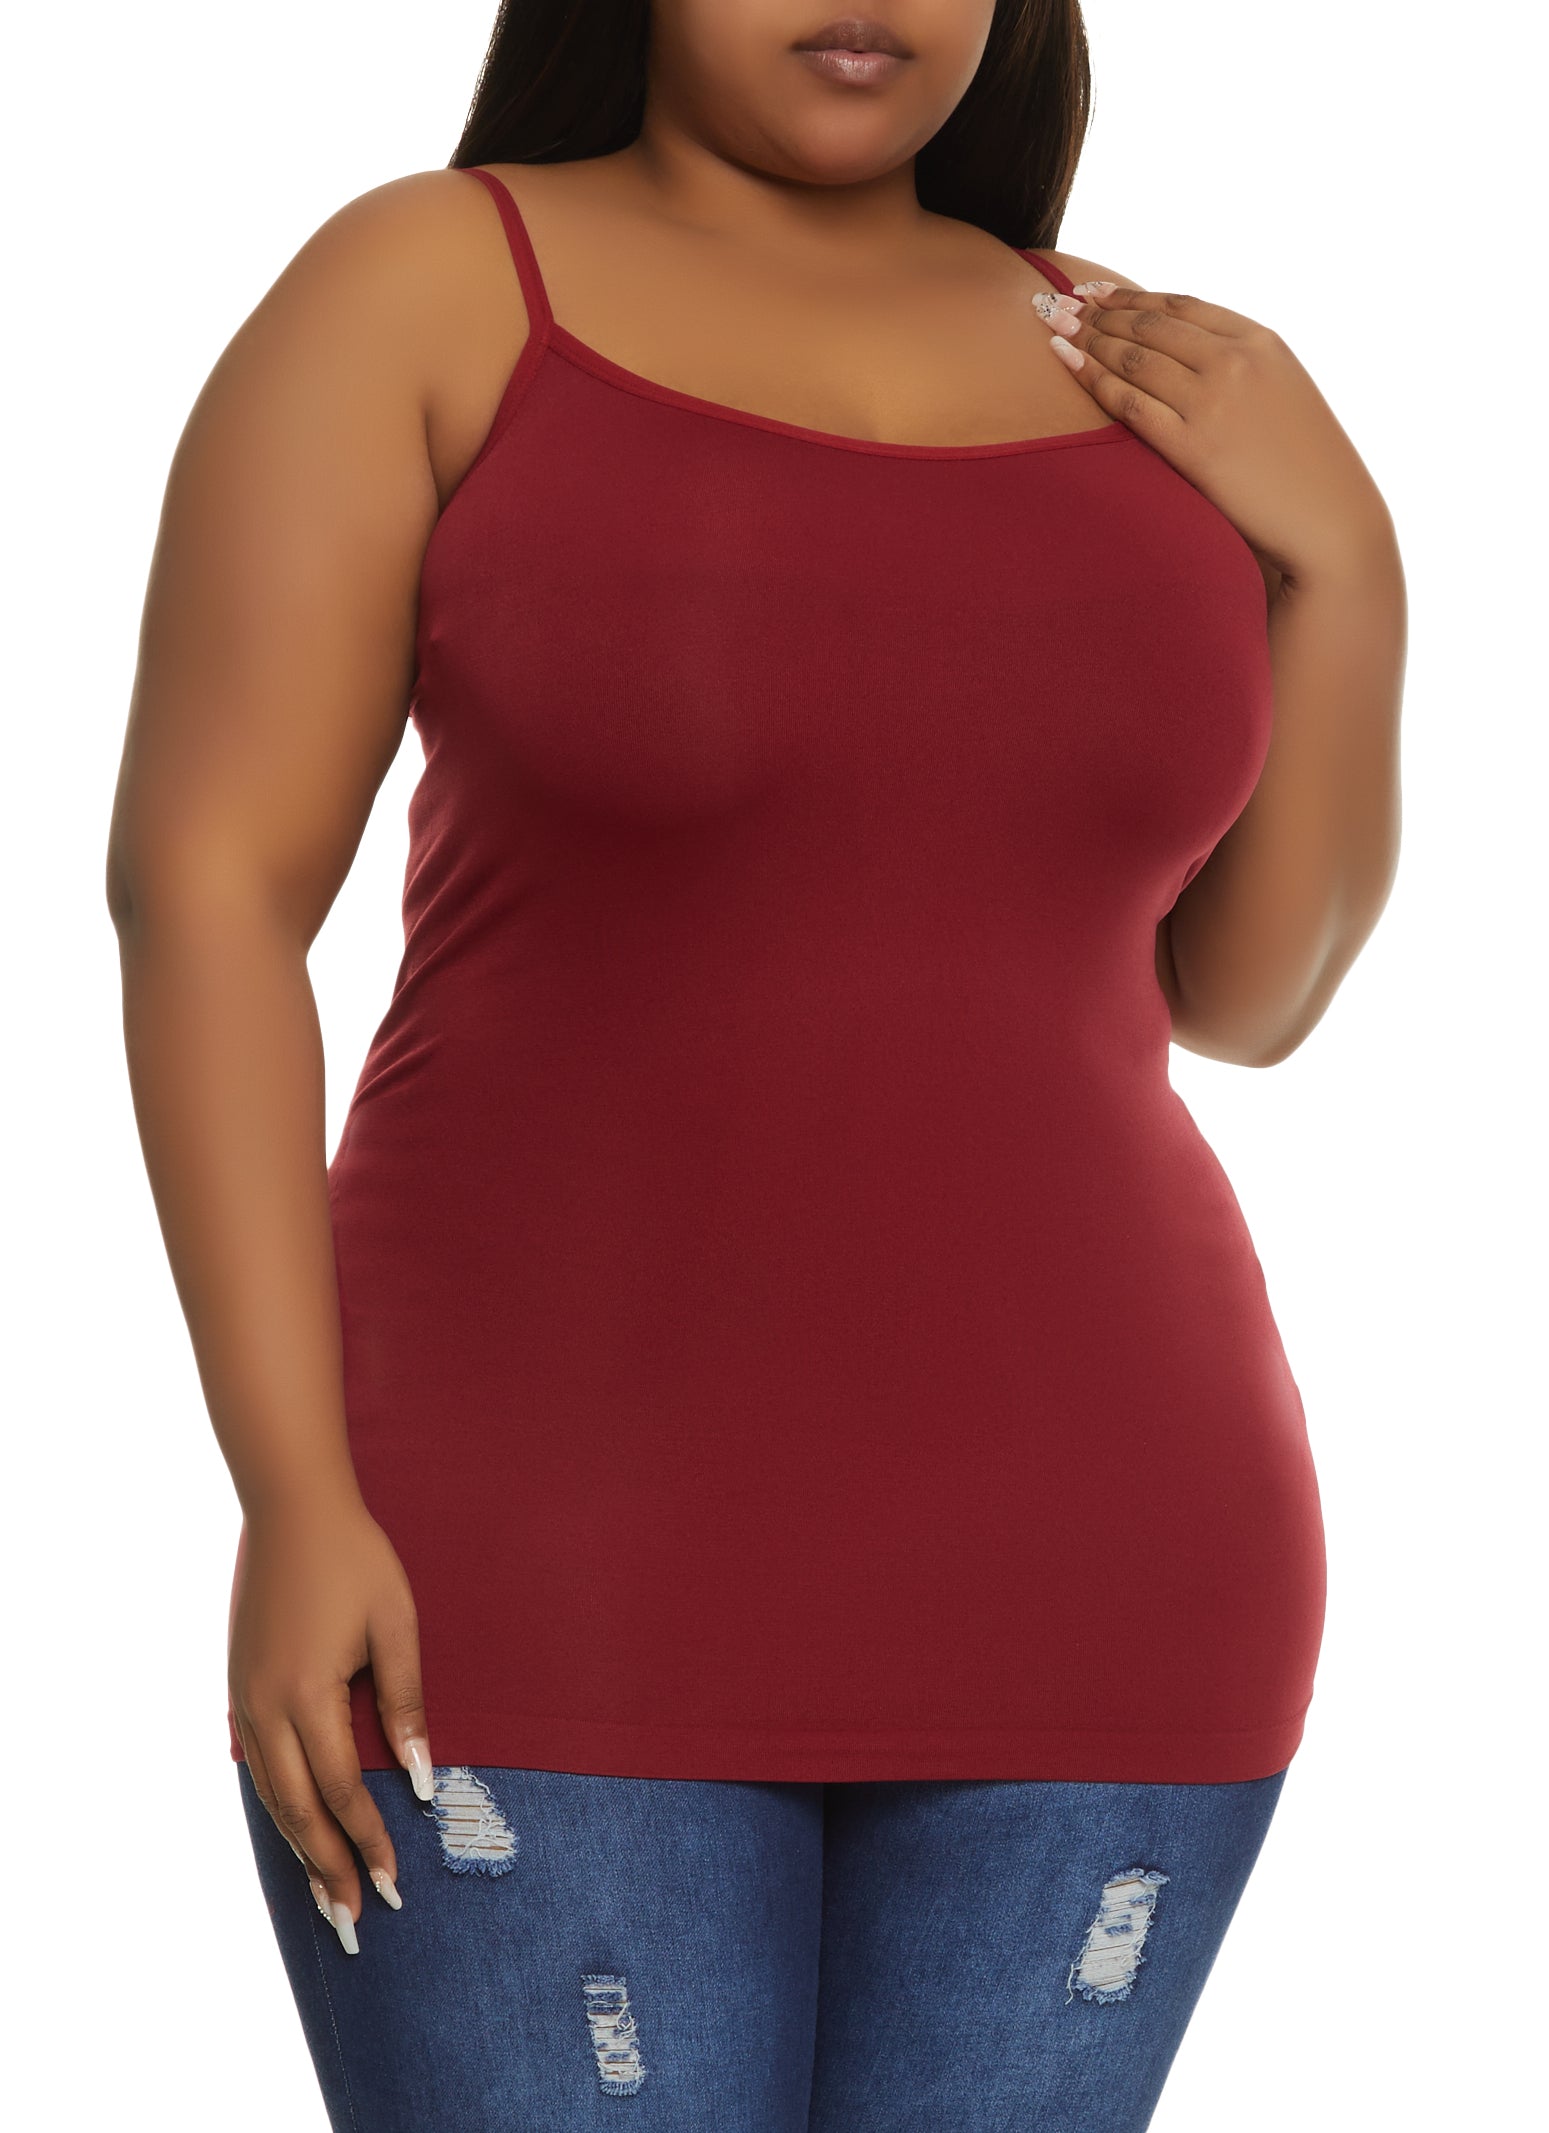 Plus Size Burgundy Tops, Everyday Low Prices